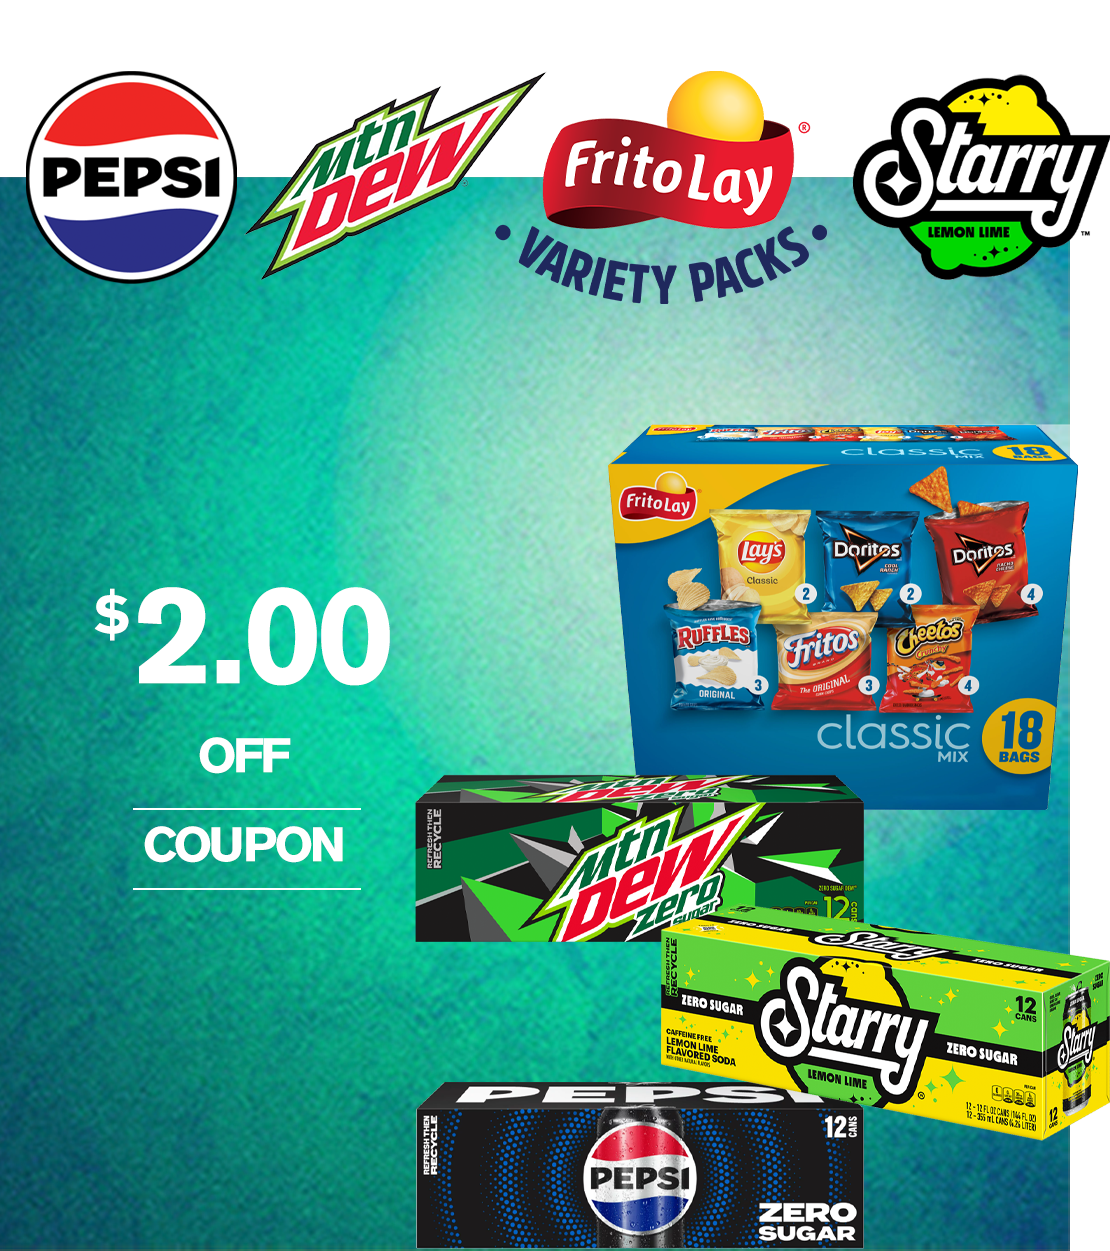 Save $2.00 off Frito Lay Variety Packs, MTN DEW, Starry, and Pepsi